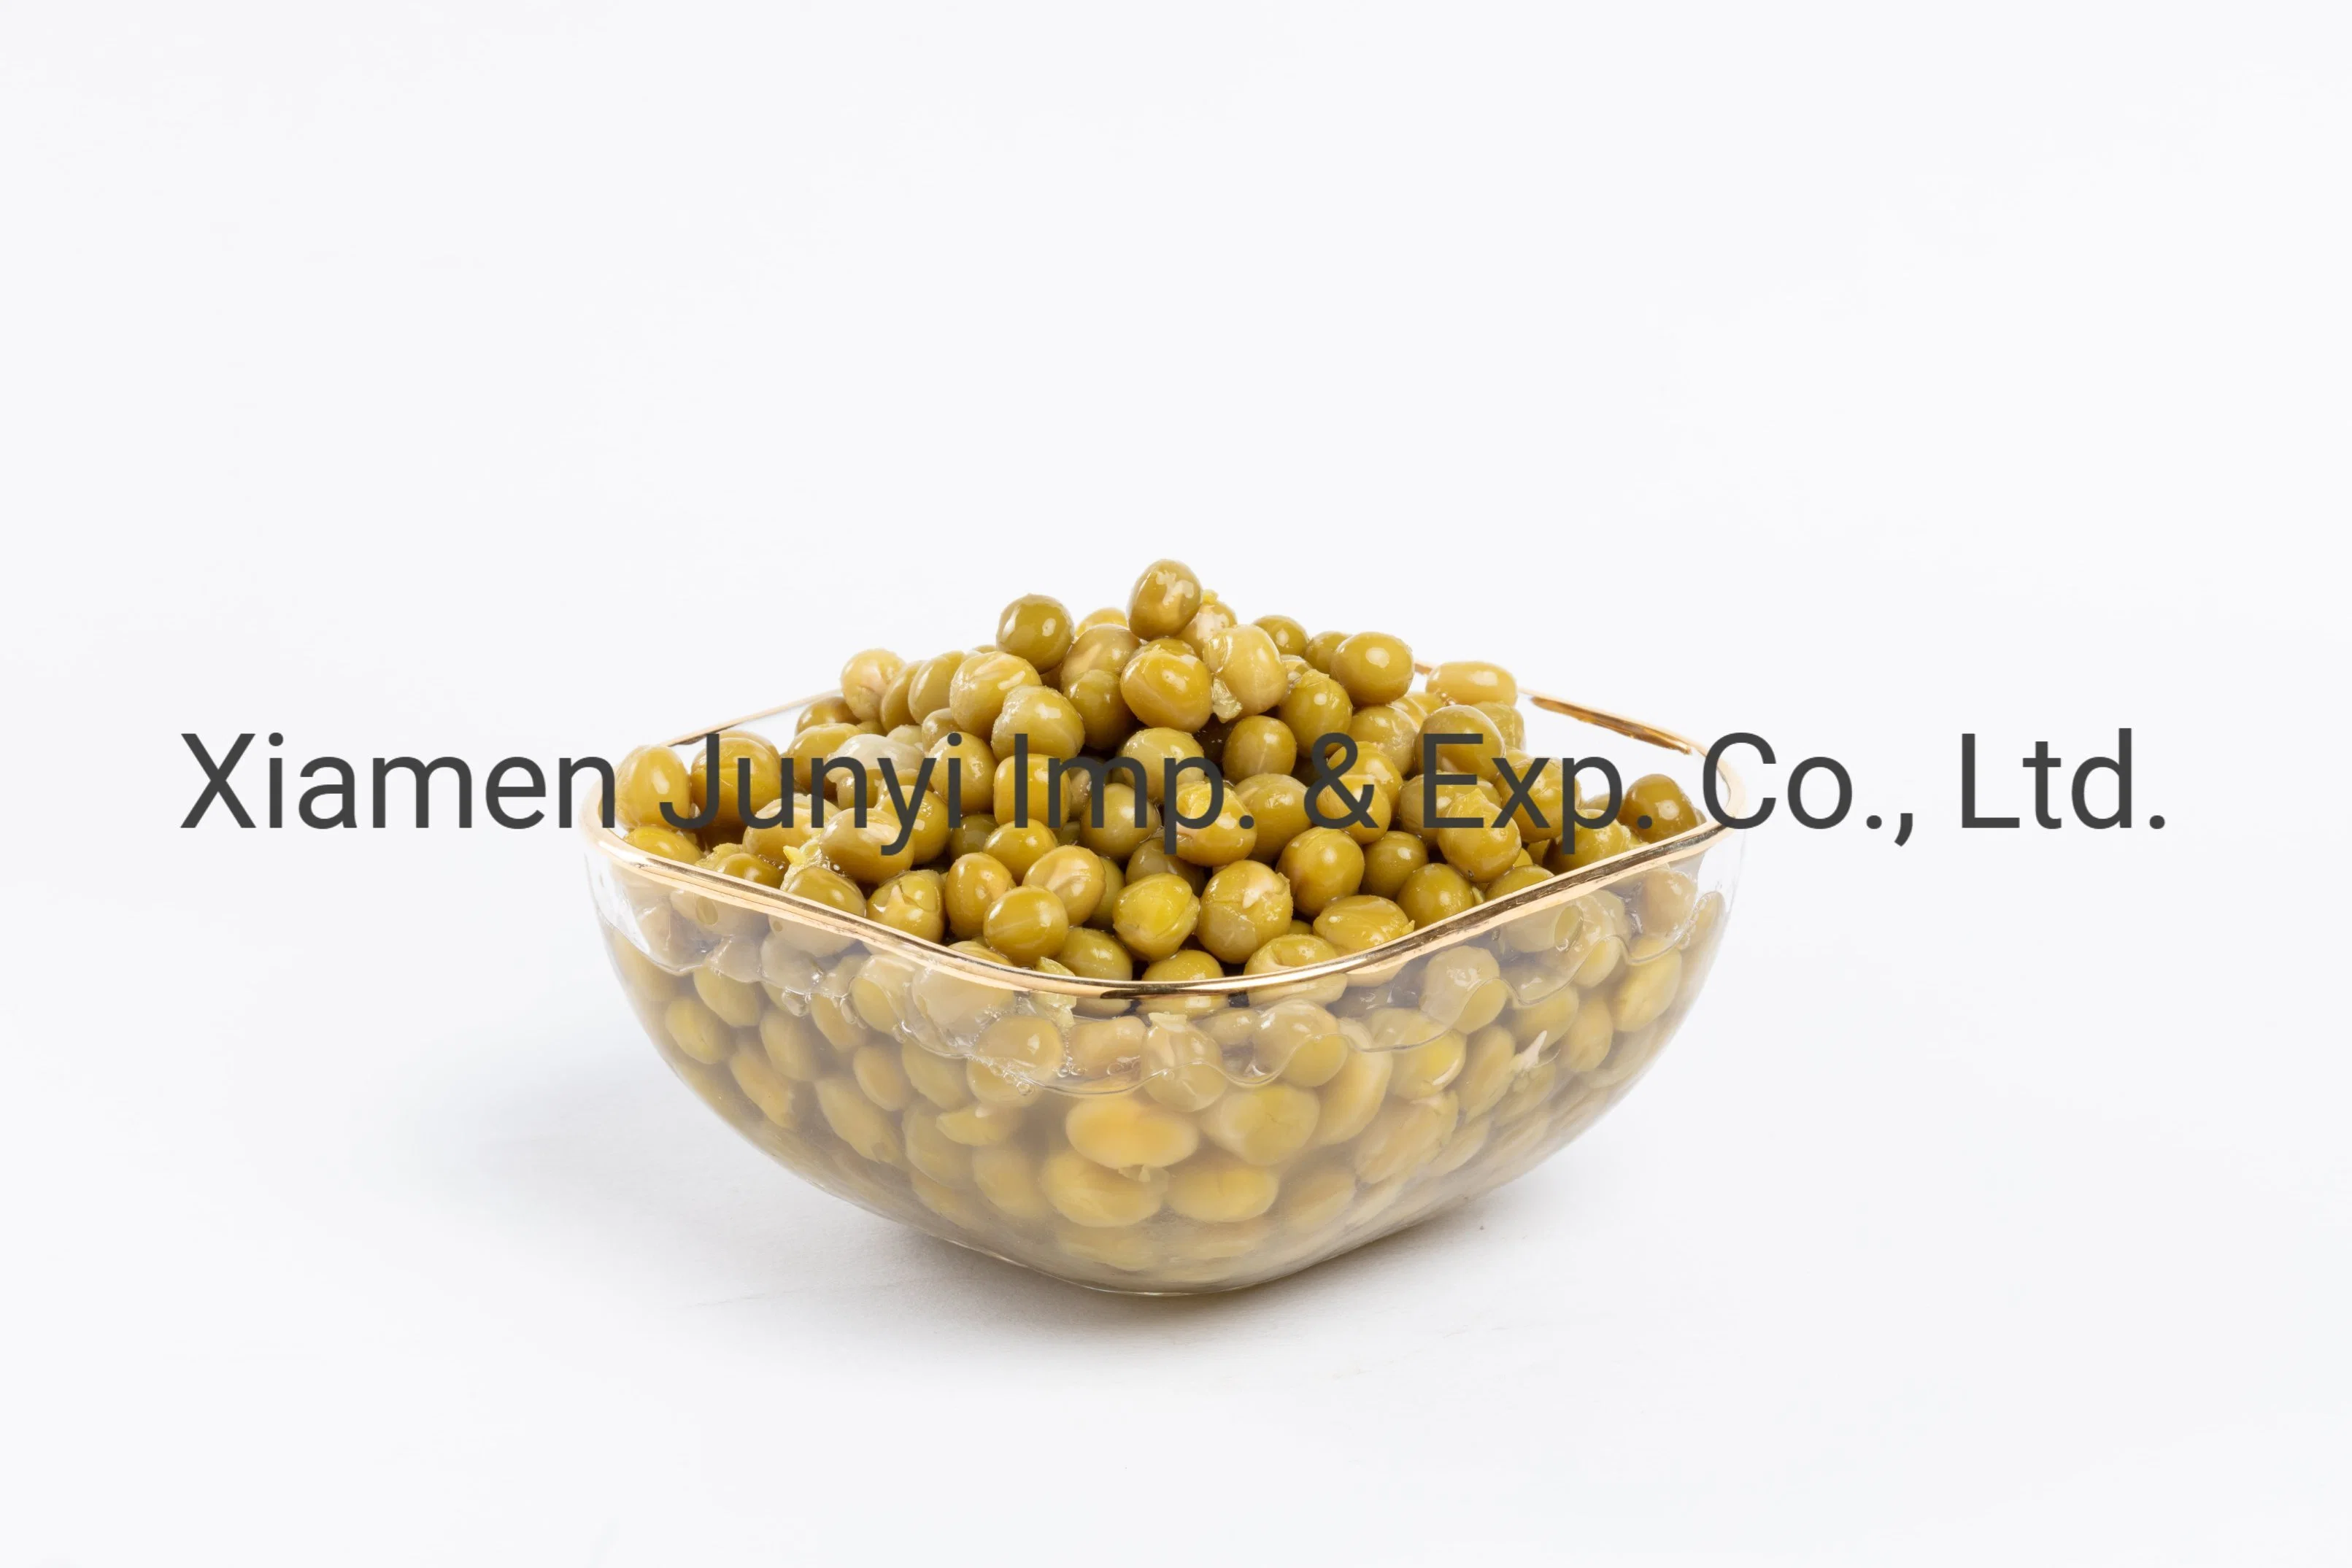 Canned Green Peas in Brine 400g with Competitive Price